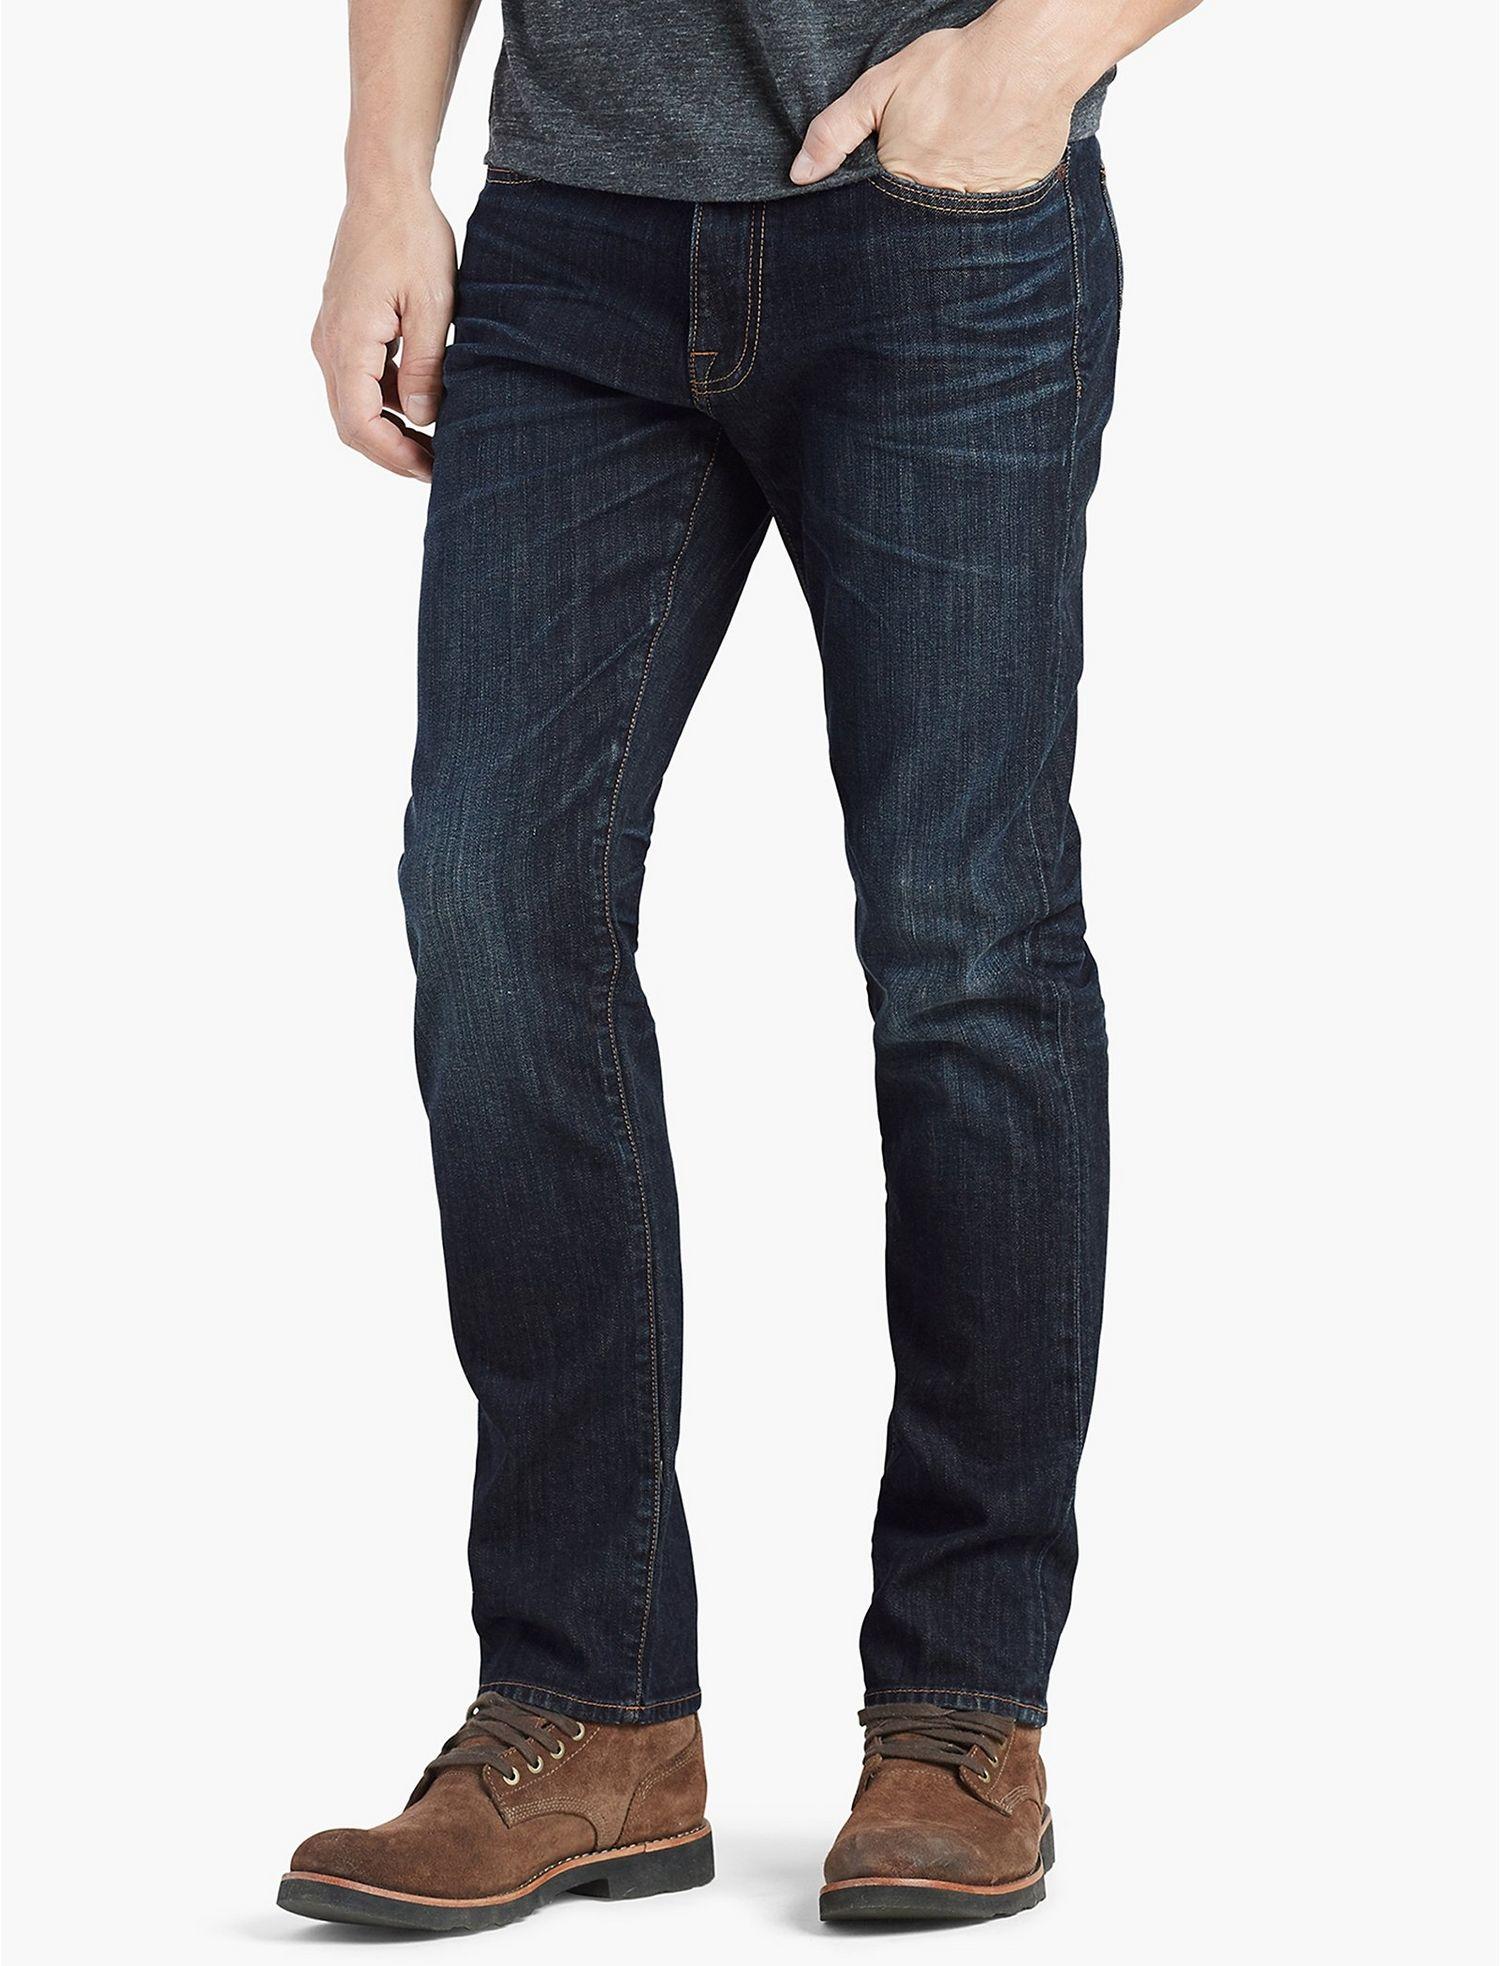 Lucky Brand 410 Athletic-fit Jeans in Blue for Men - Lyst